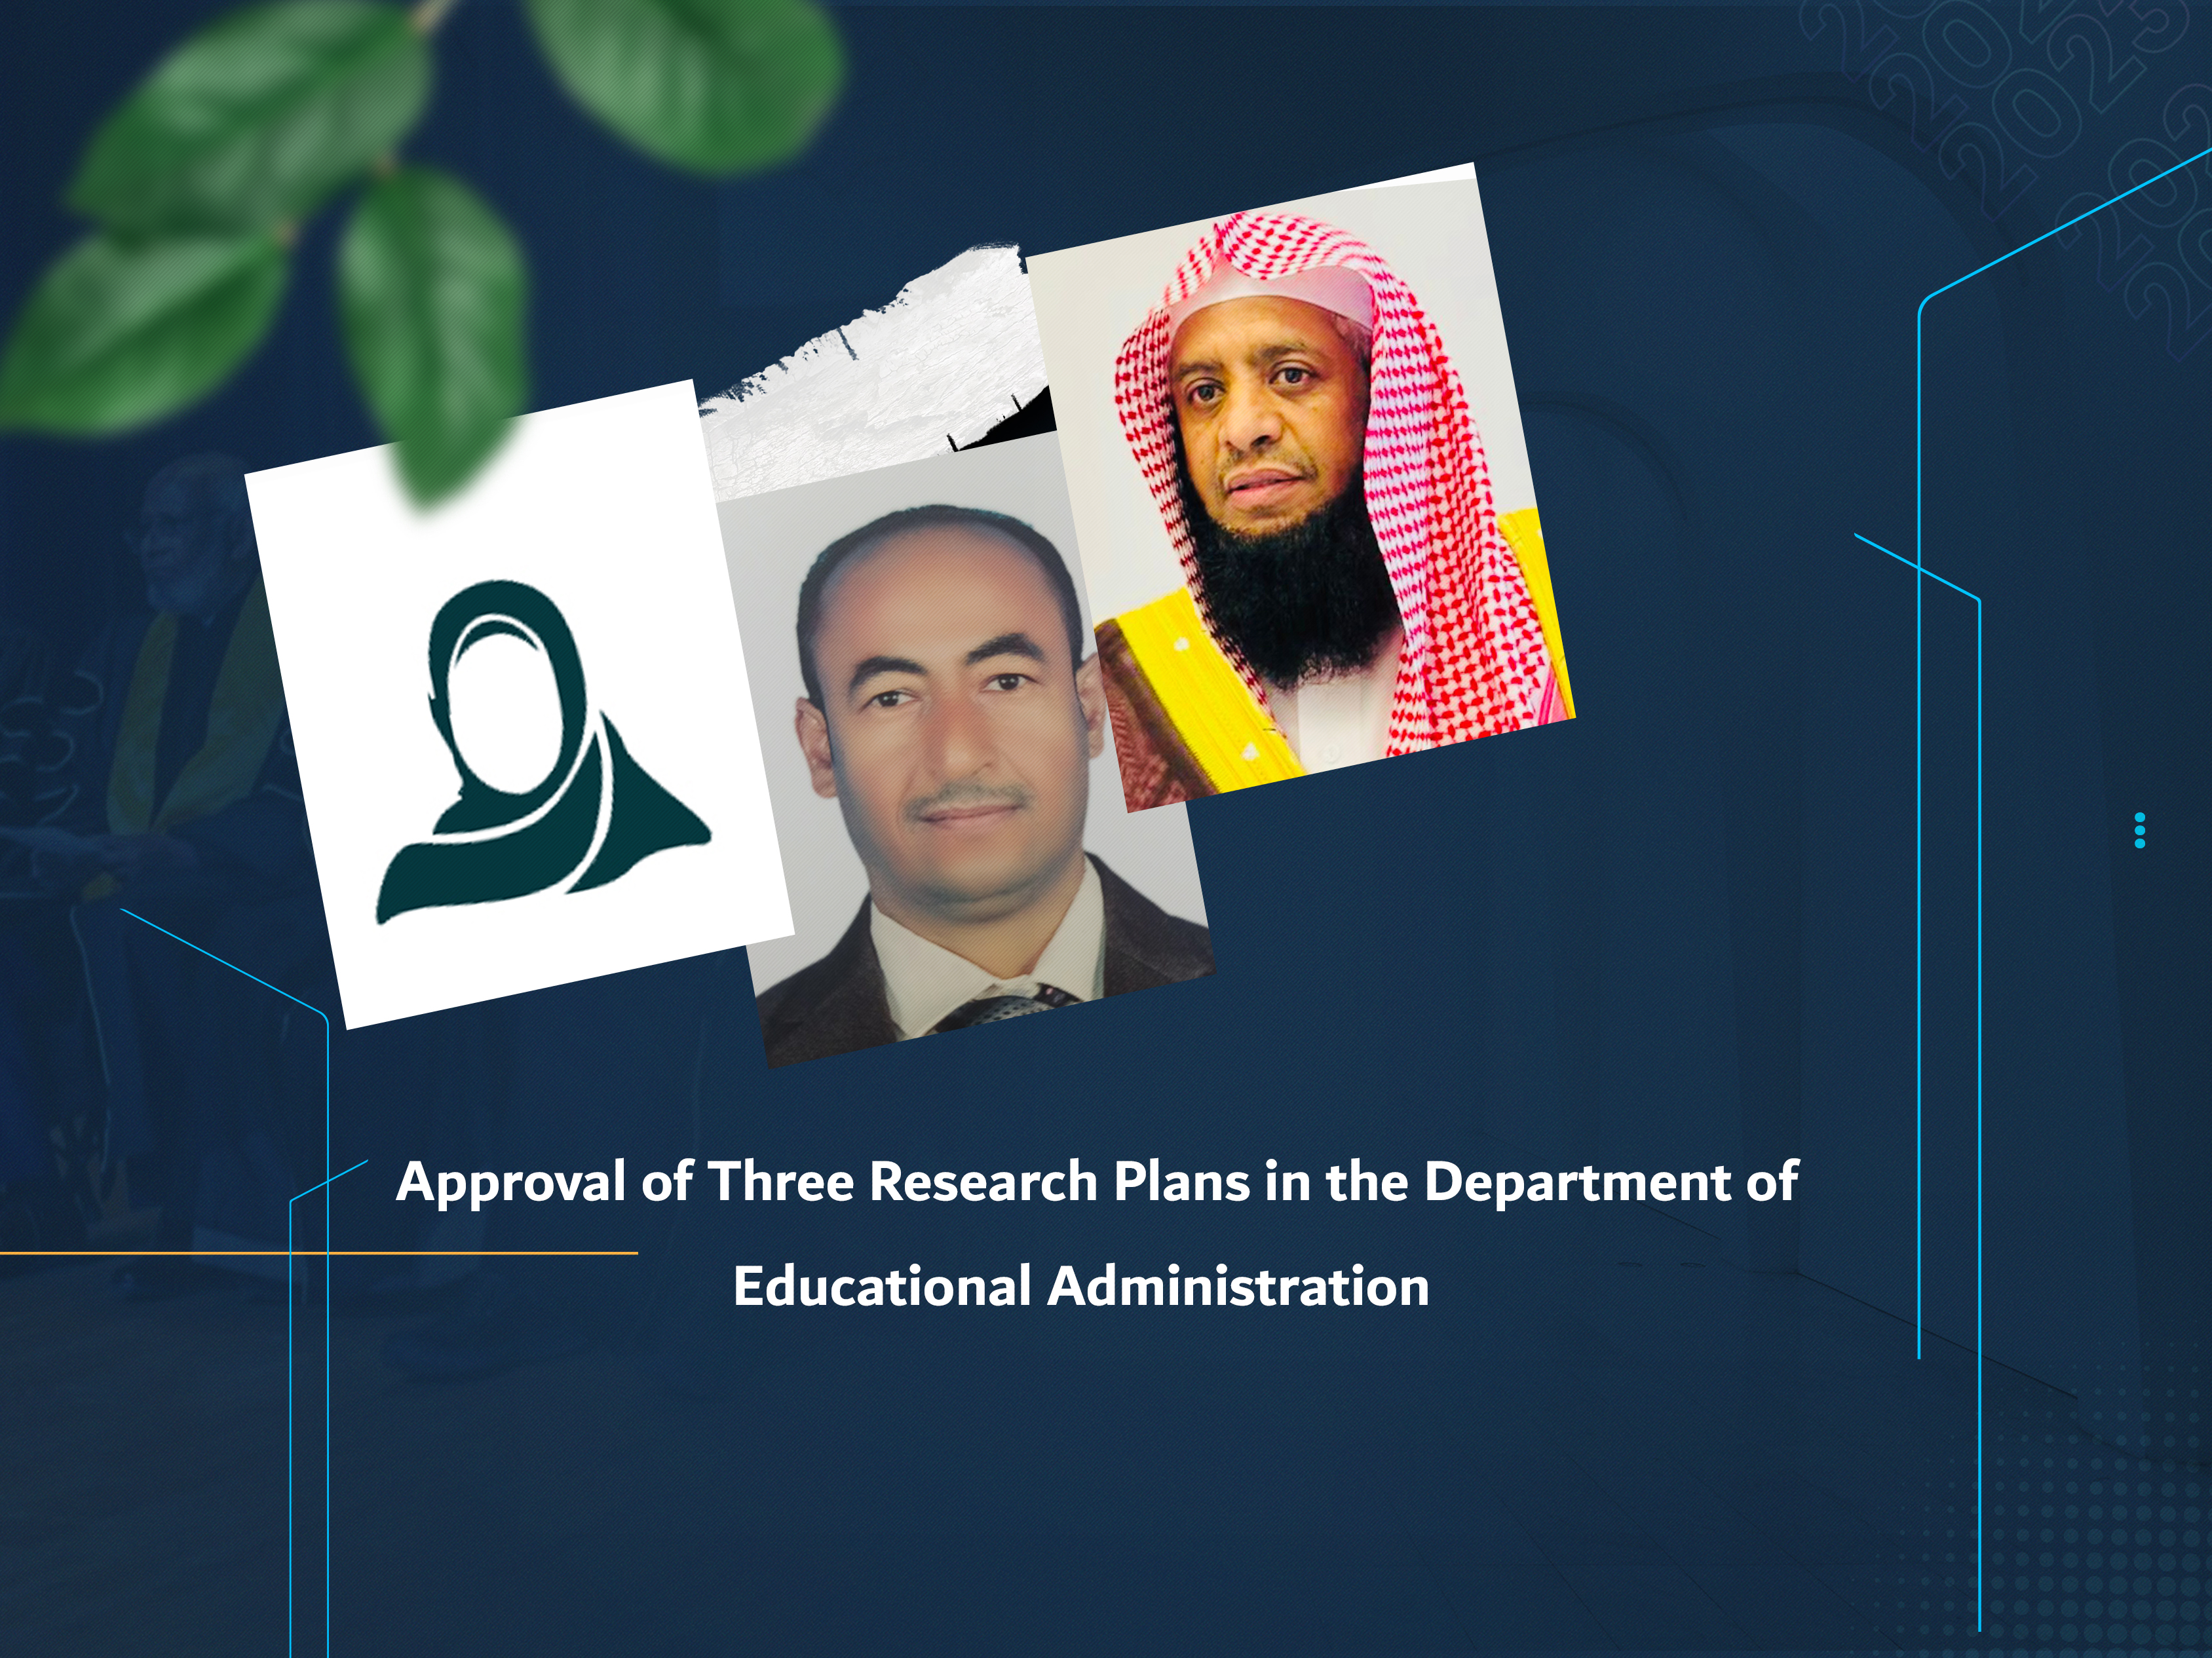 Approval of Three Research Plans in the Department of Educational Administration